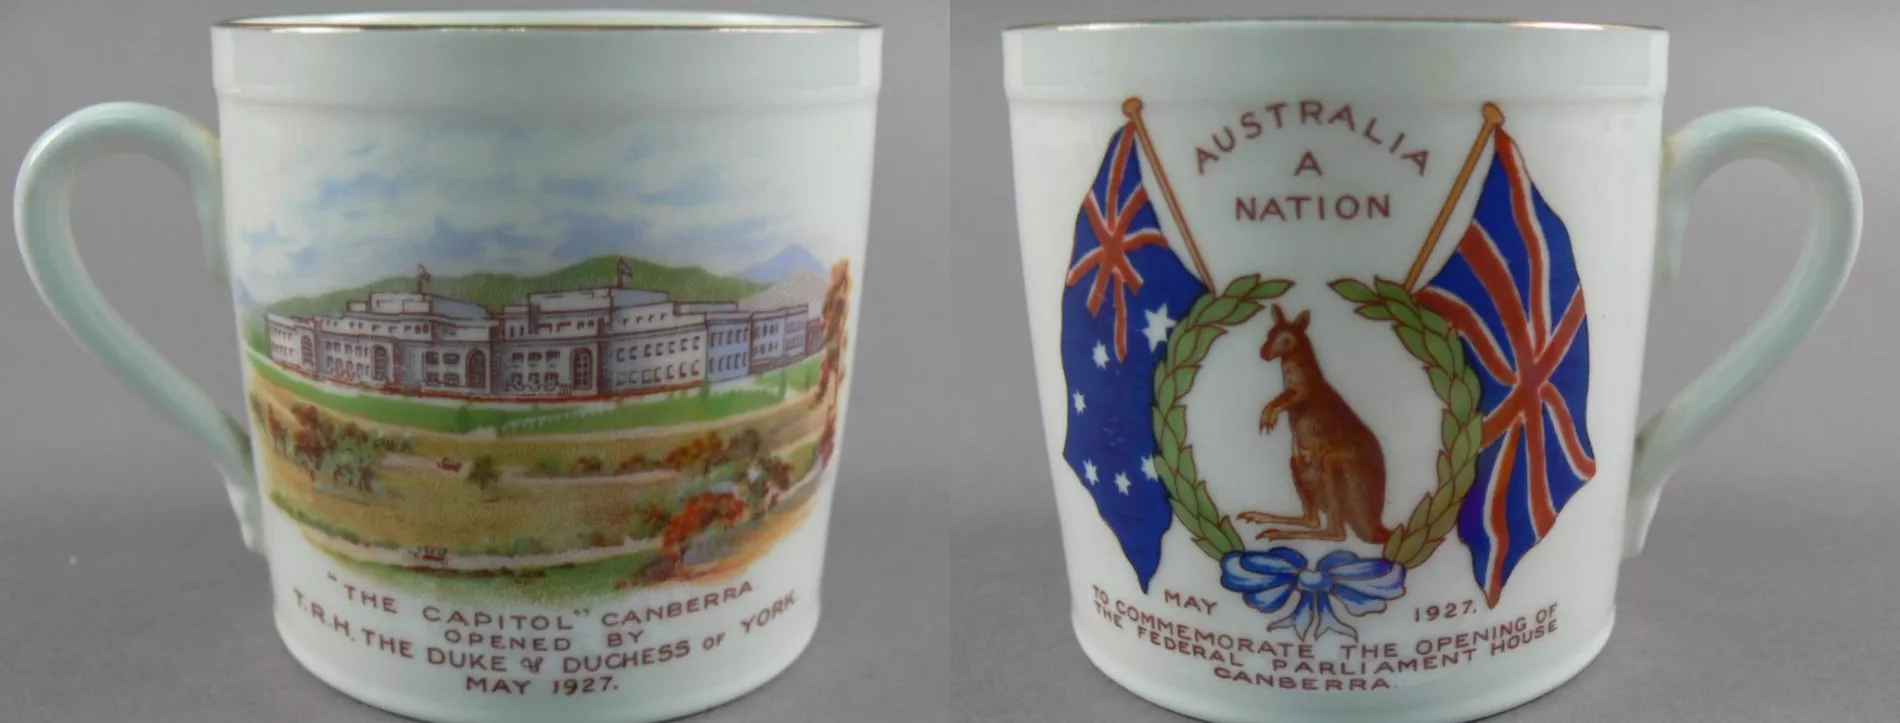 Souvenir mug from 1927, the front depicting parliament house surrounded by green hills and fields, the back showing a wreath with a kangaroo and the Australian and UK flags.